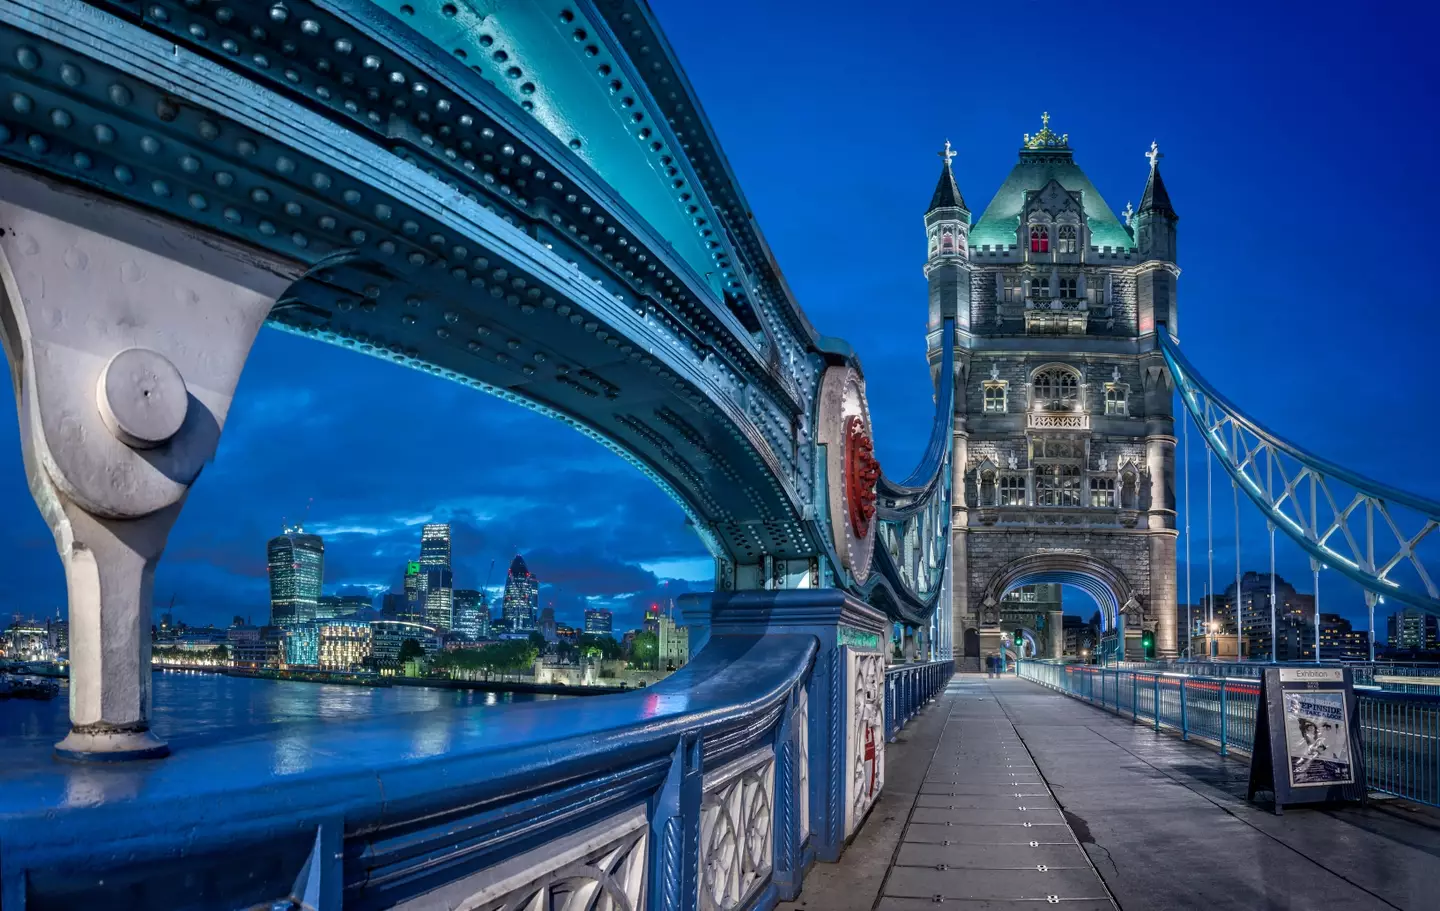 Tower Bridge was built over 125 years ago to ease road traffic (